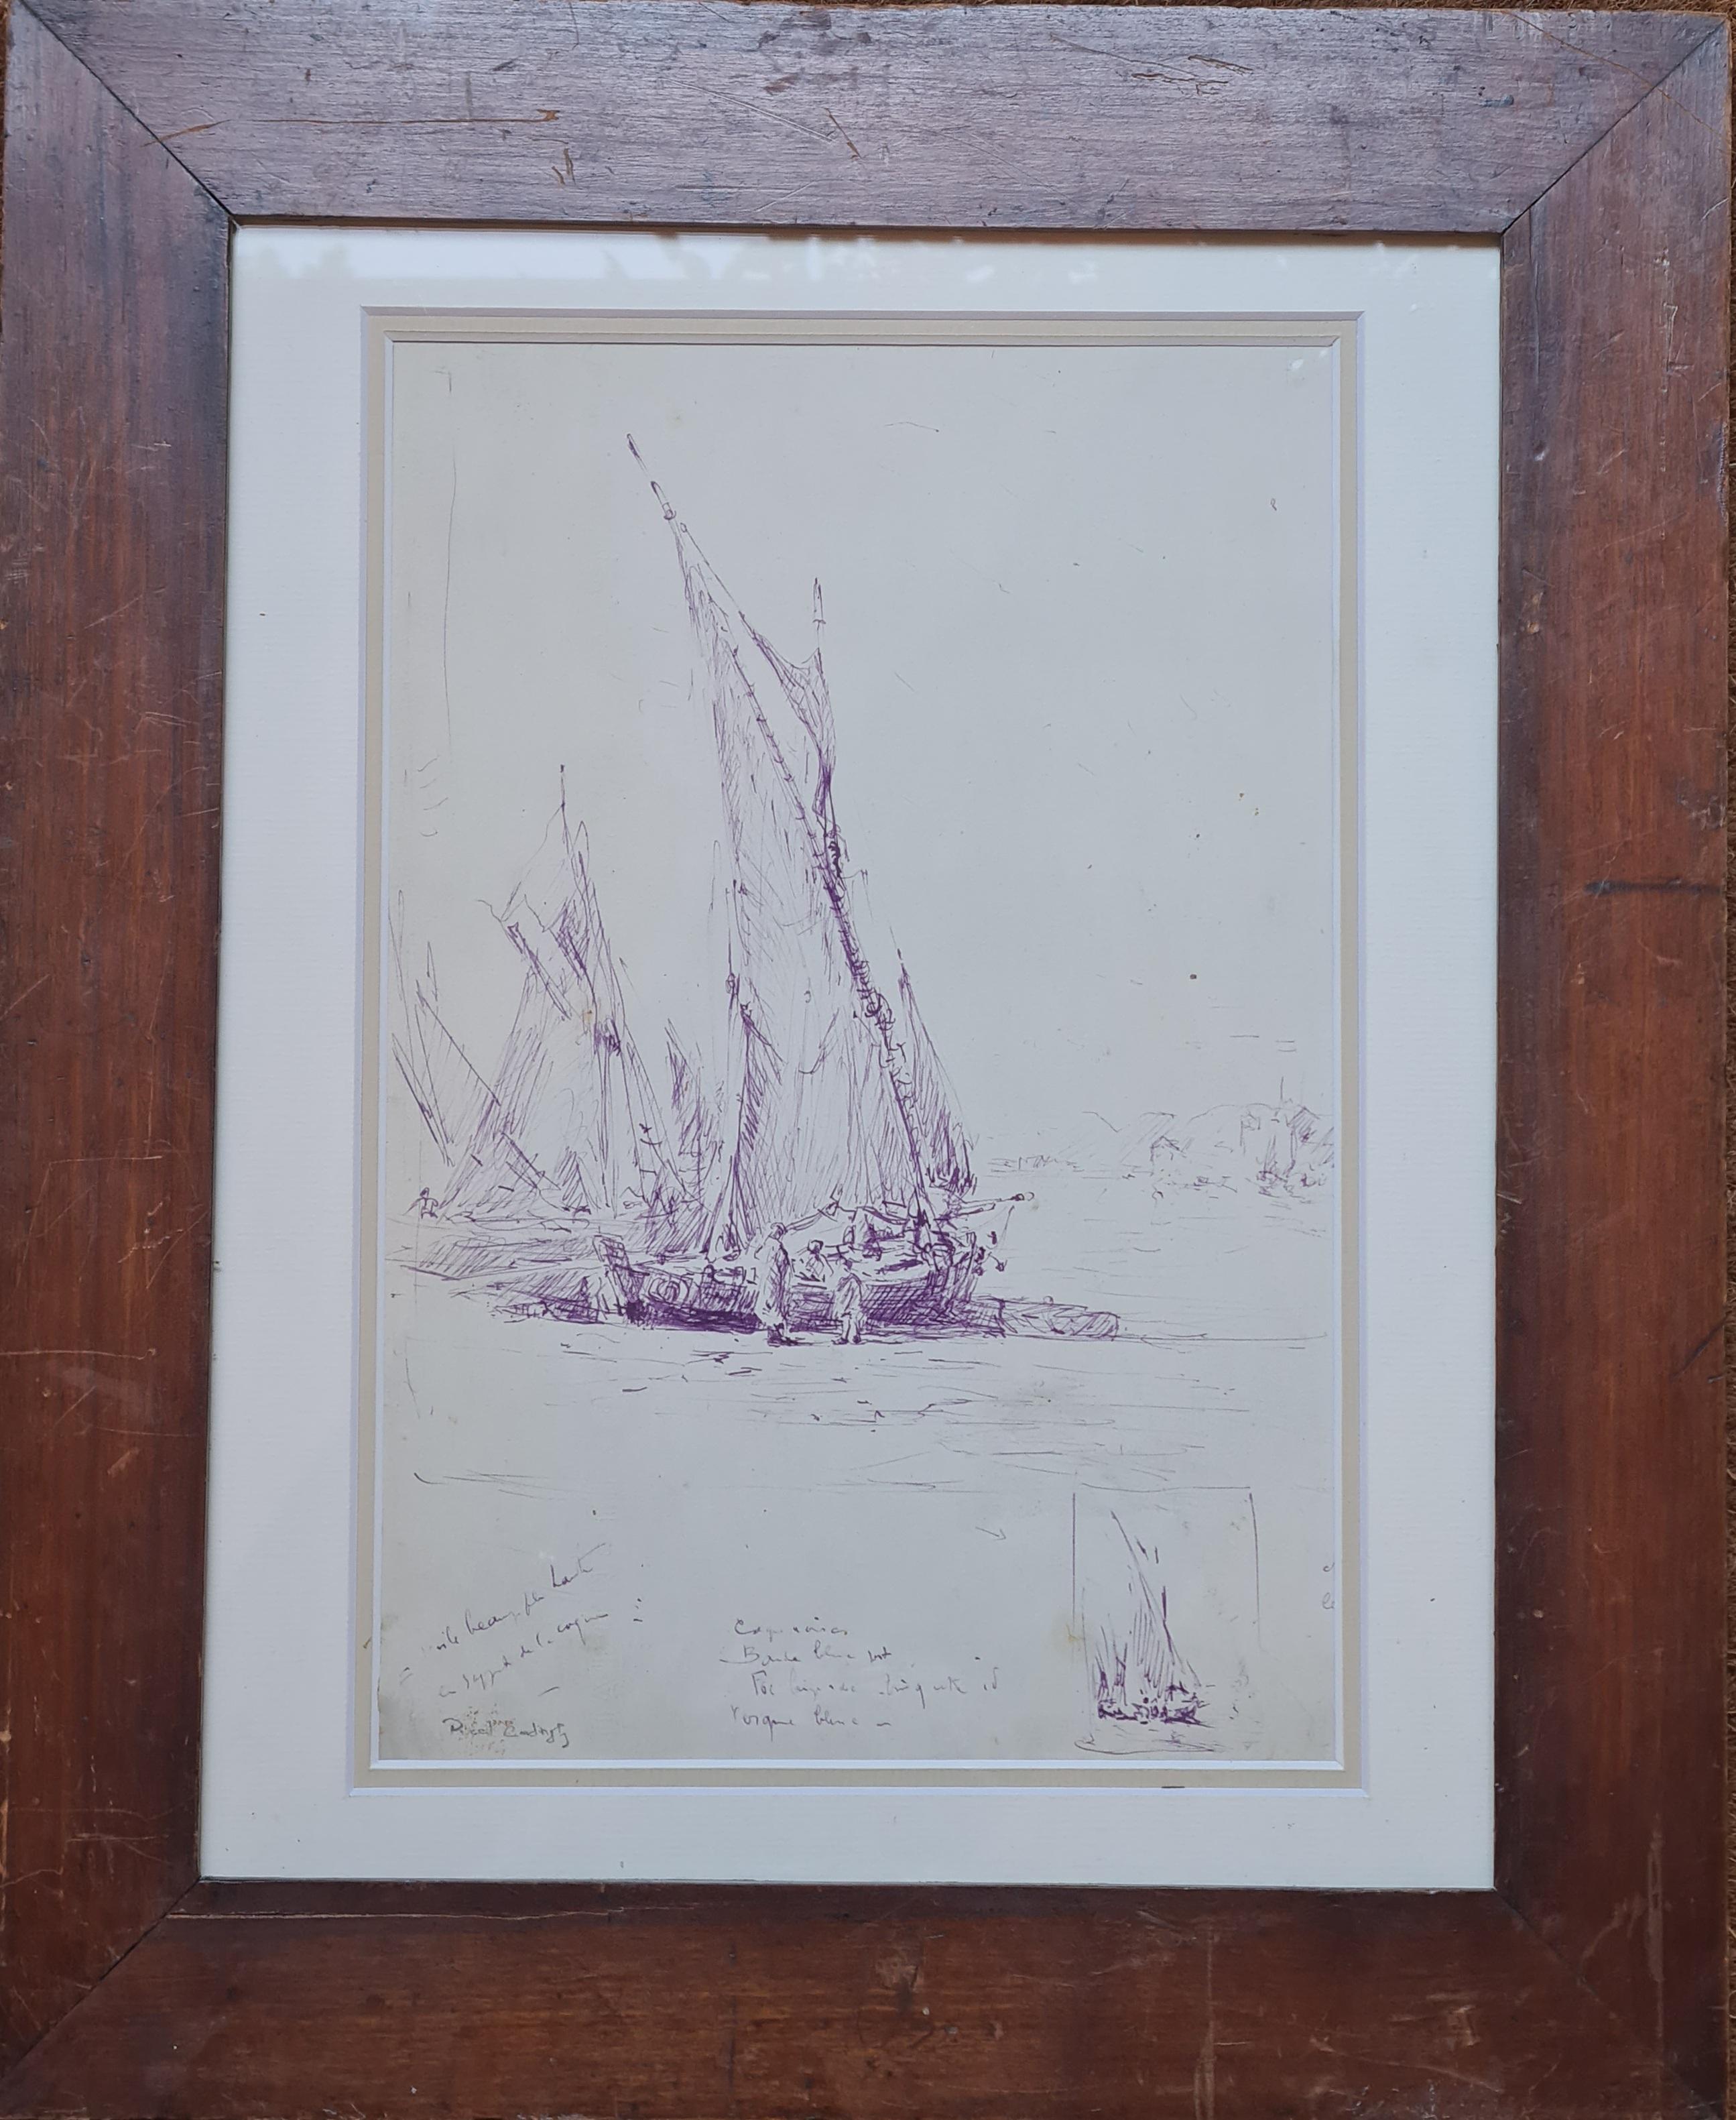 Fishing Boats, late 19th Century French Marine Mauve Ink Drawing - Romantic Art by Georges Ricard-Cordingley